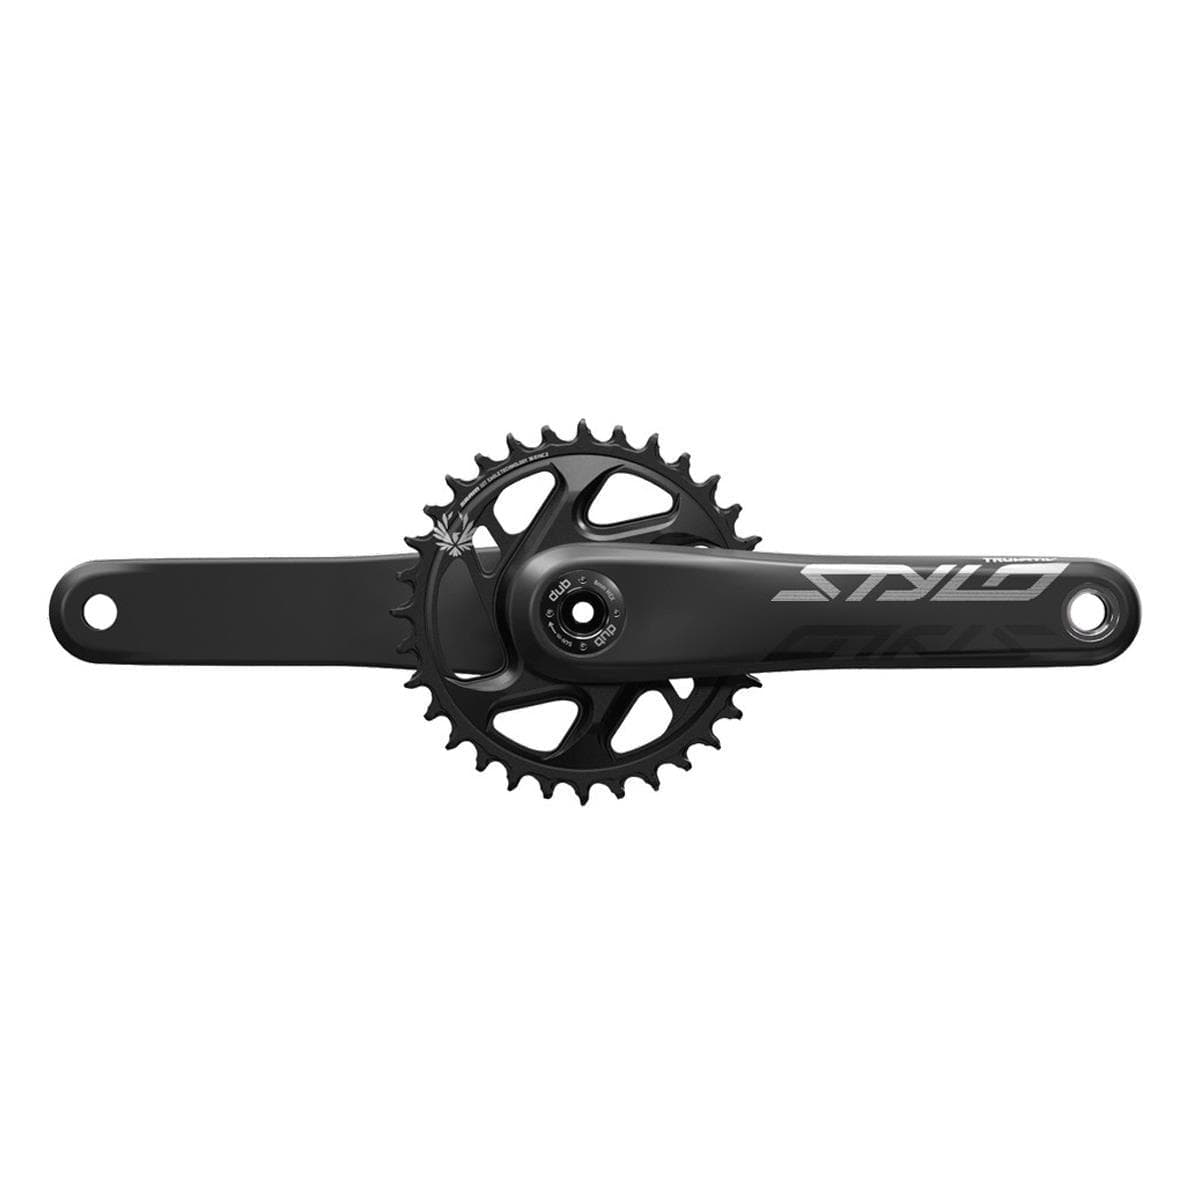 Truvativ Crank Stylo Carbon Eagle Fat Bike 4" Dub 12S 175 Wdirect Mount 30T X-Sync 2 Chainring Black (Dub Cups/Bearingsnot Included): Black 175Mm